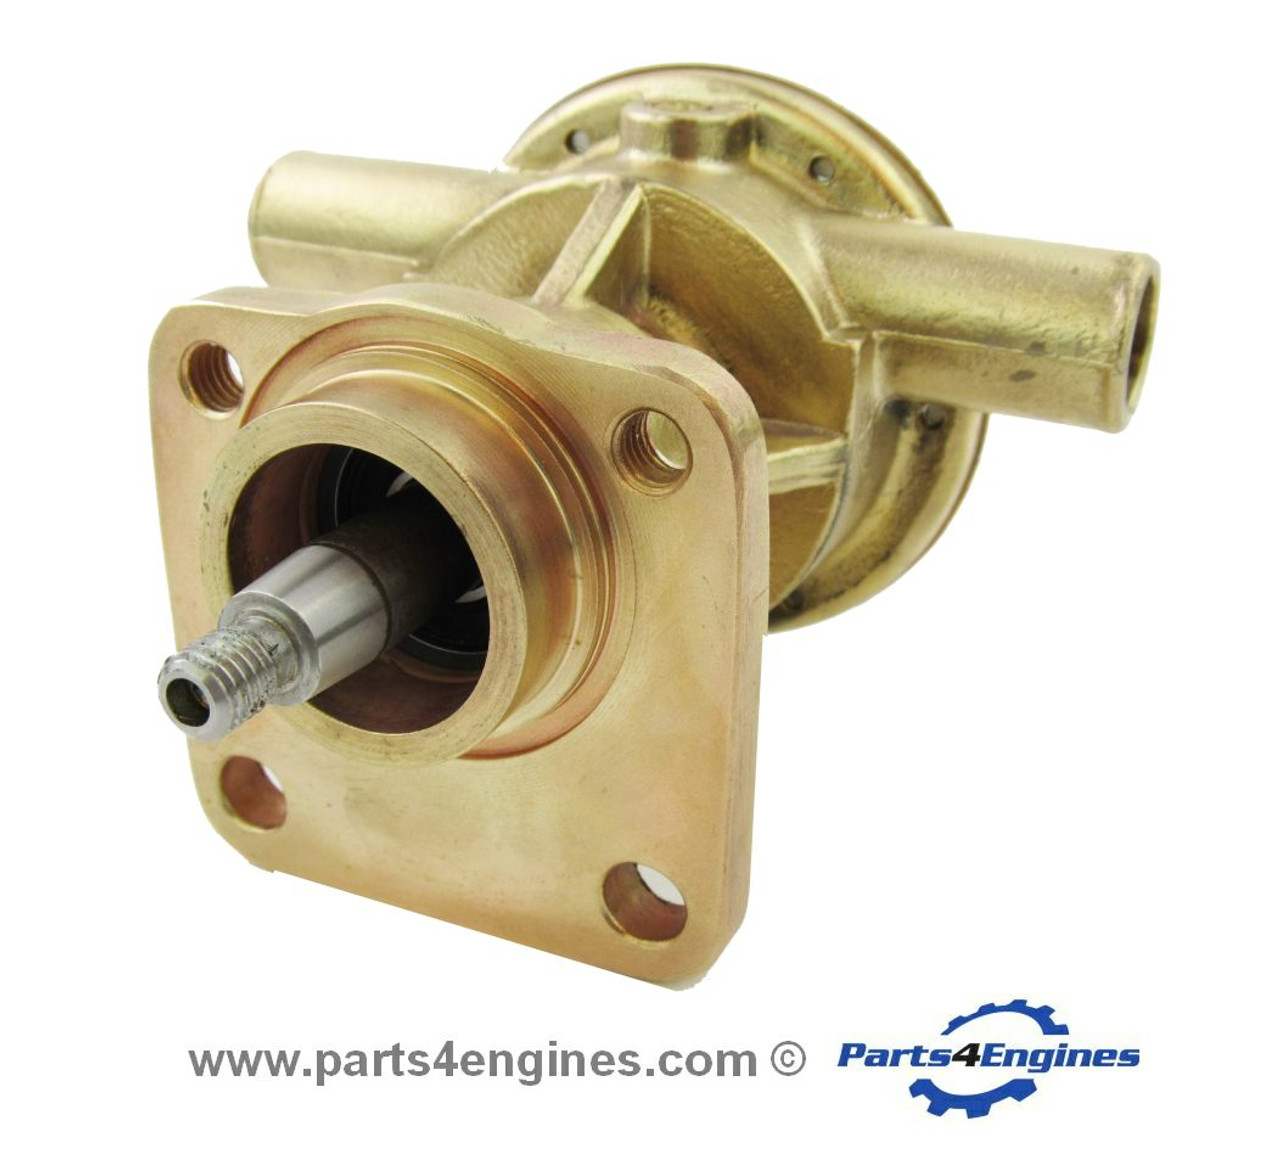 Raw water pump Volvo Penta D1-13, from parts4engines.com